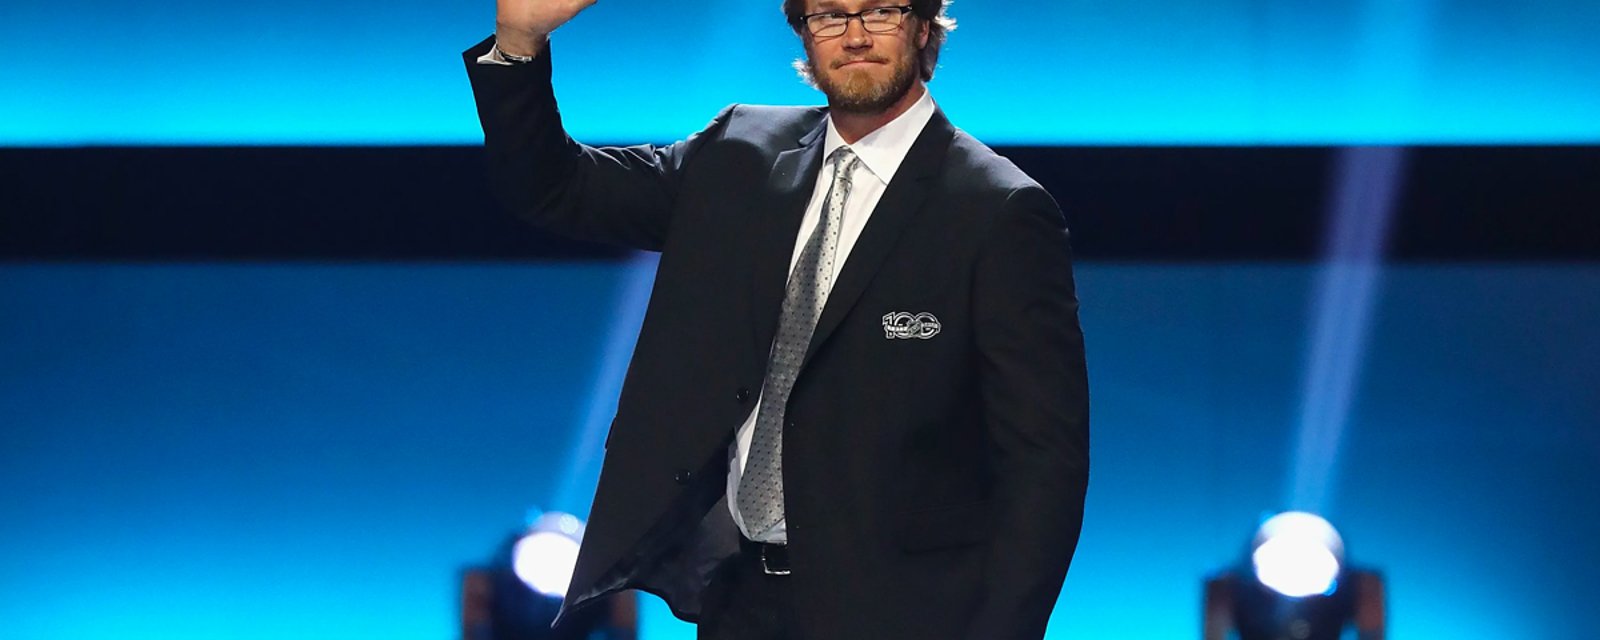 Multiple reports point to Chris Pronger GM hiring